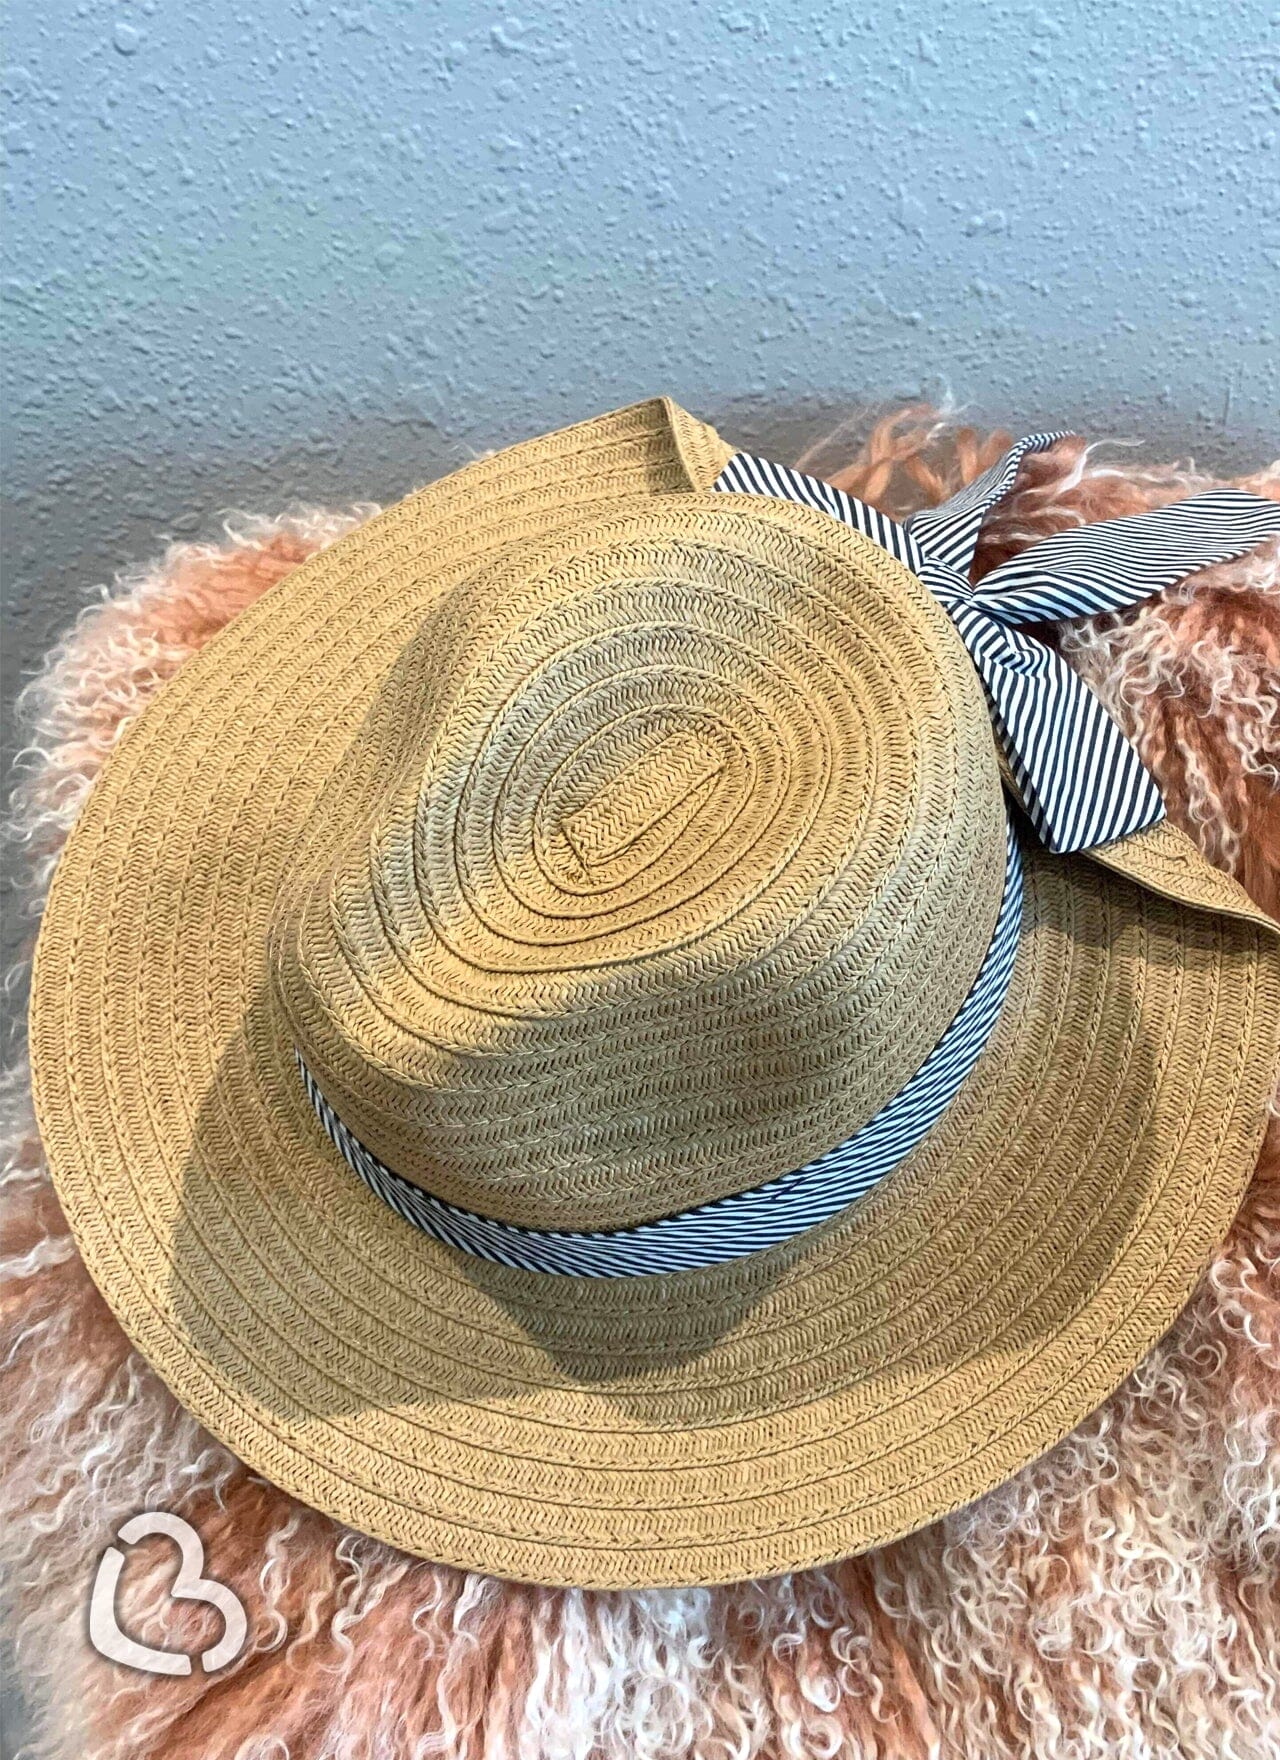 Striped Bow Brown with Black Straw Hat Hat Cheekys Brand 